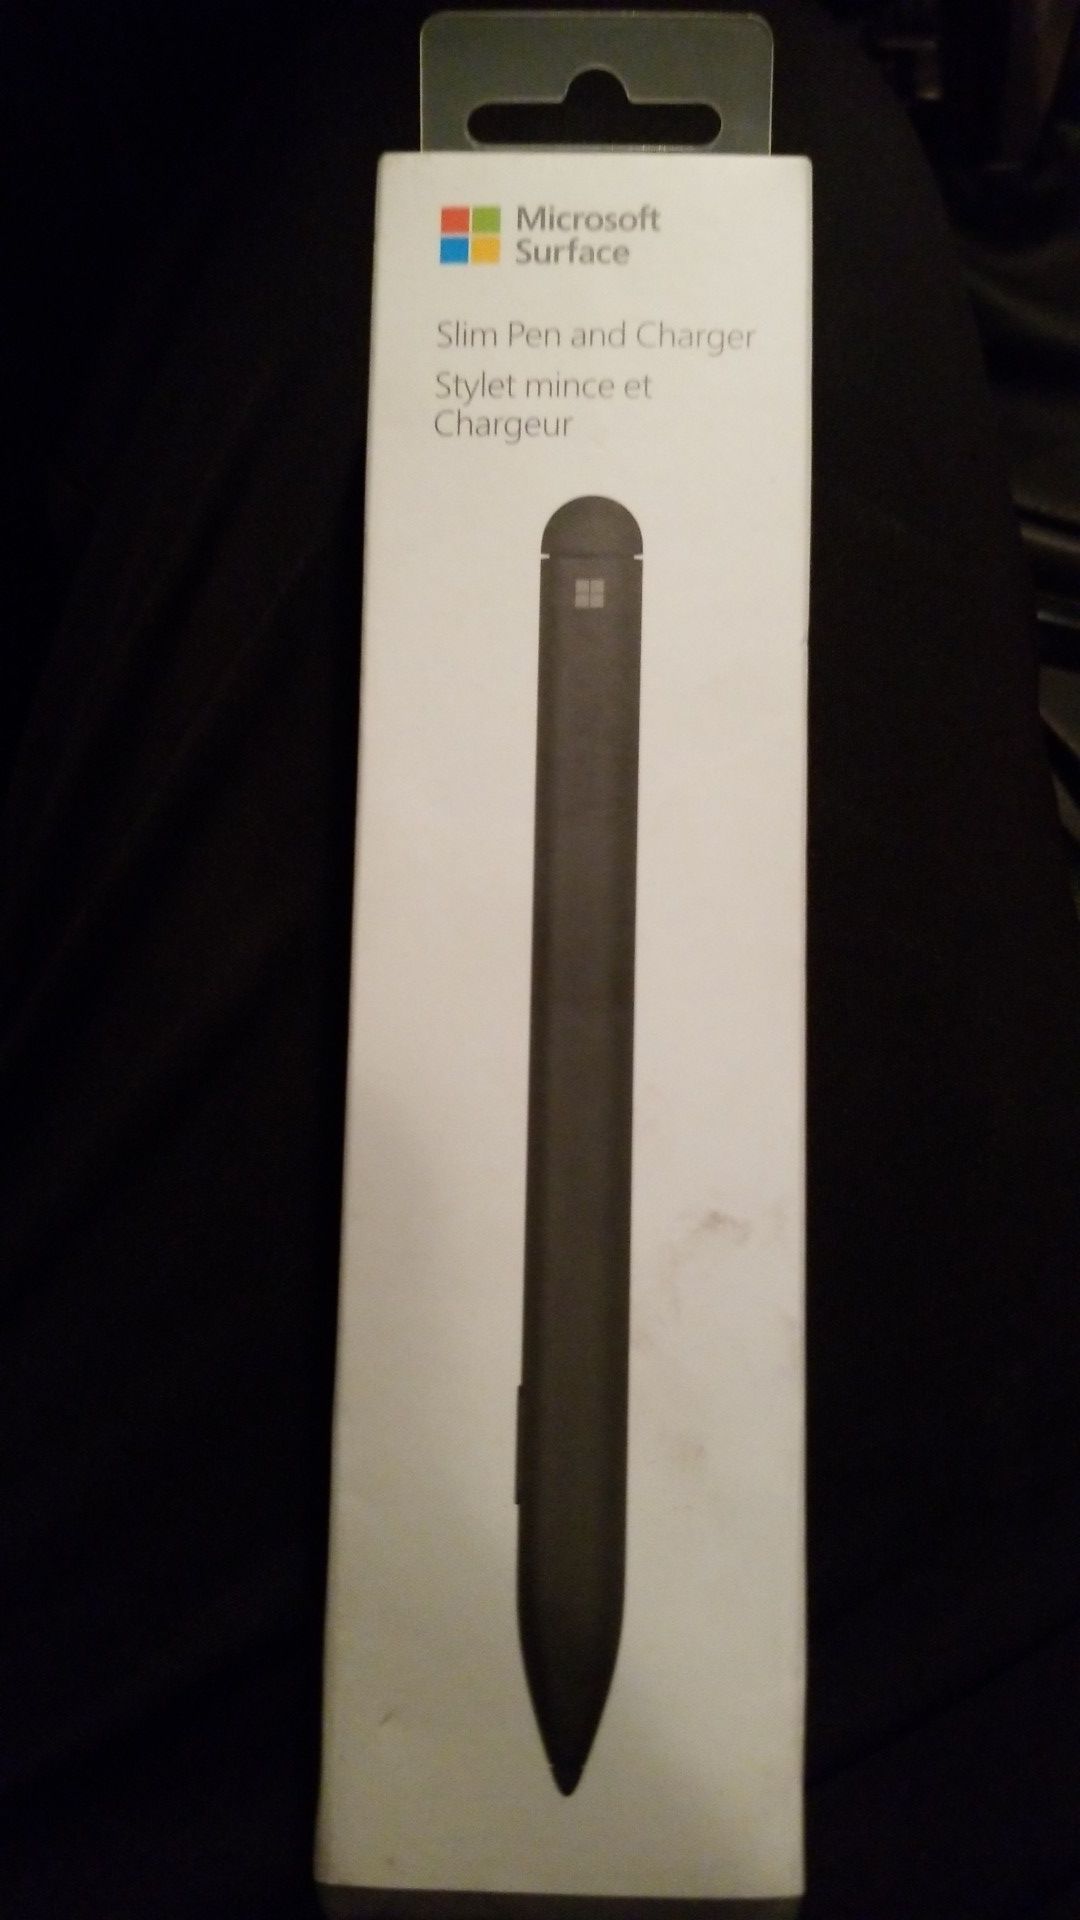 Microsoft surface slim pen and charger